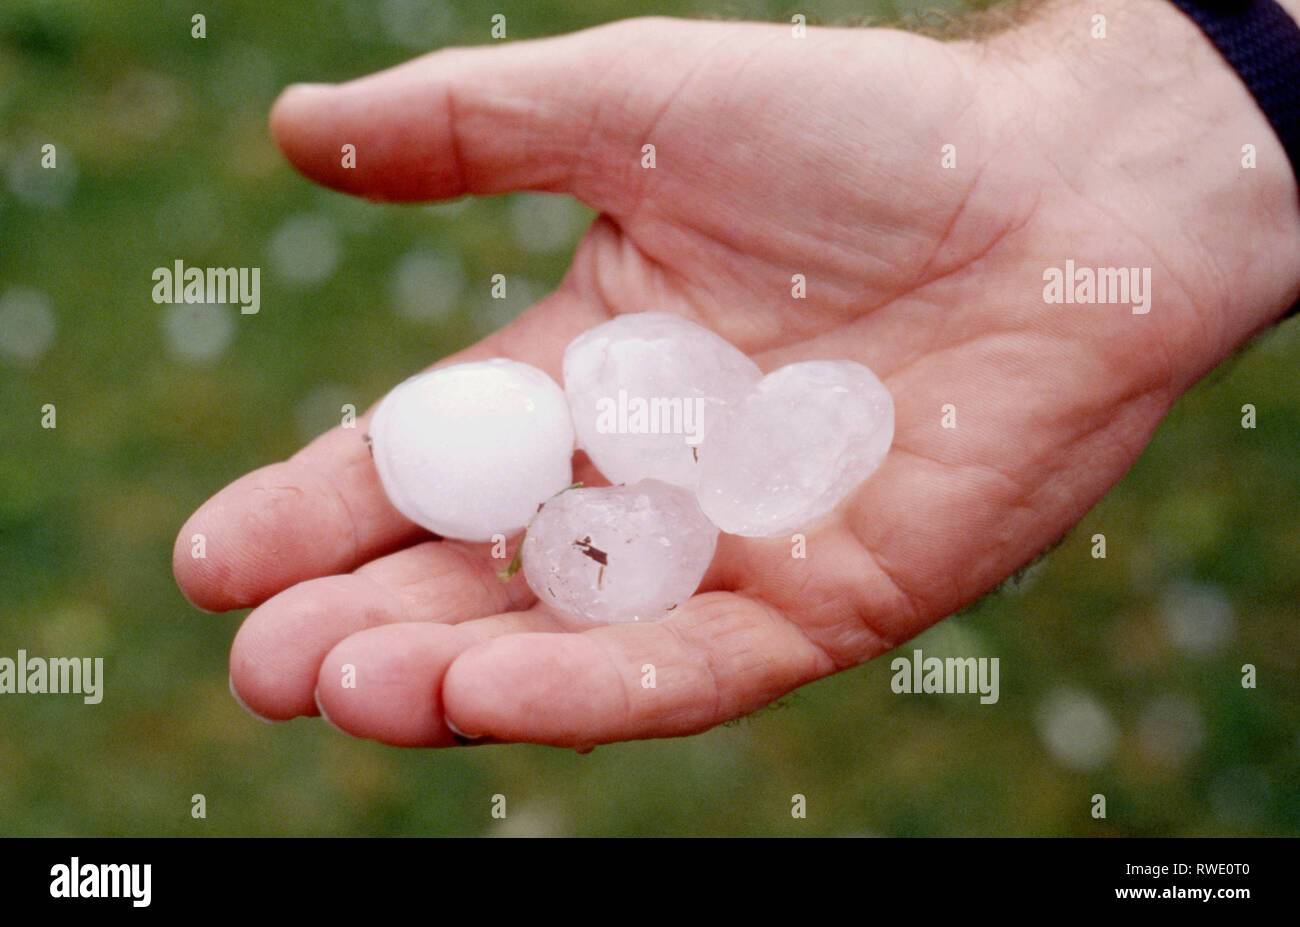 MANS HAND HOLDING LARGE HAIL STONES FROM RECENT STORMS, NEW SOUTH WALES, AUSTRALIA. Stock Photo